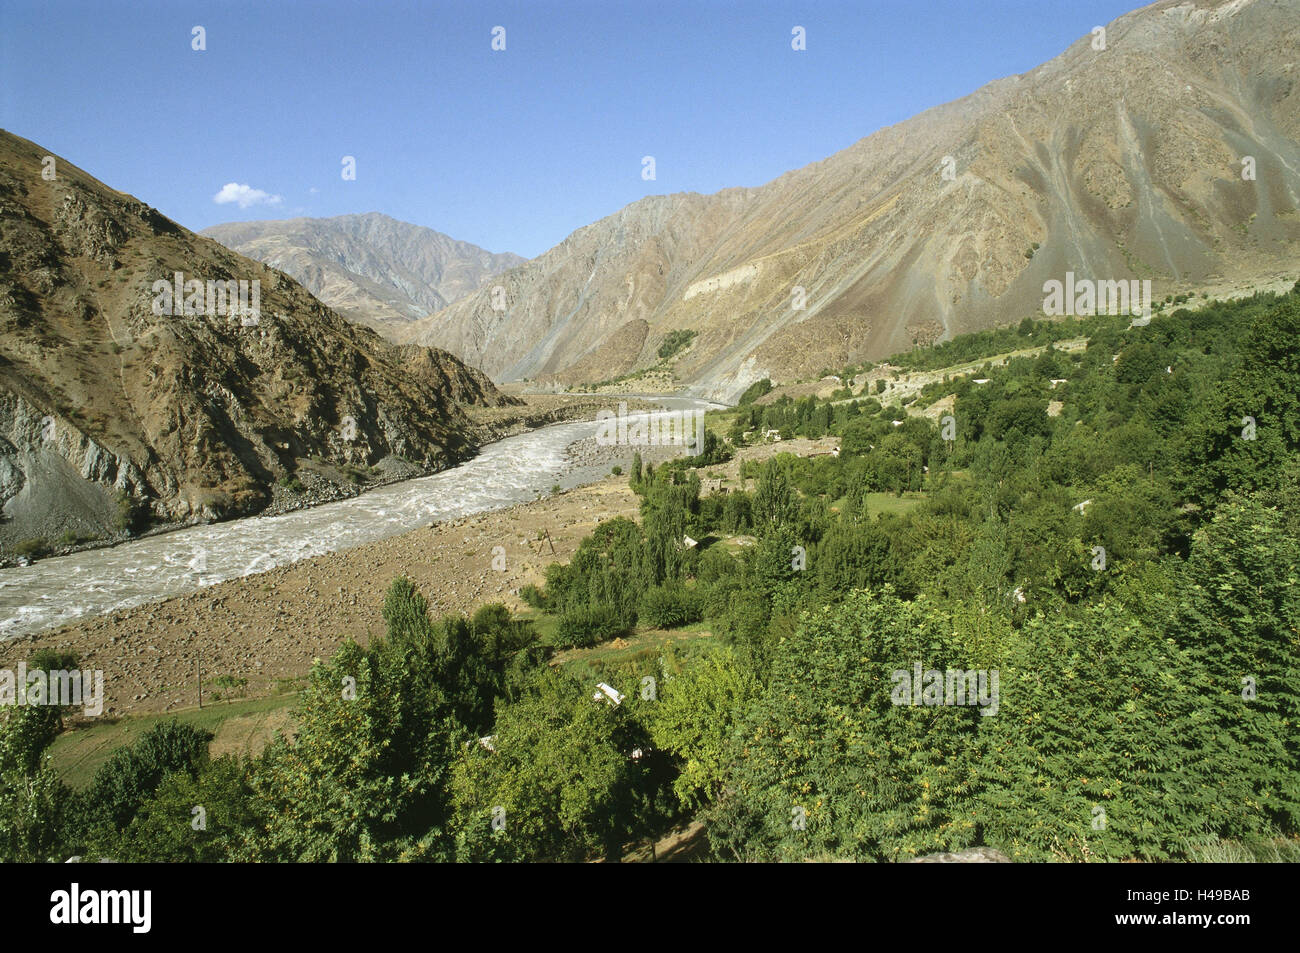 Tajikistan, river Pjandsch, oasis, mountain desert, Asia, Central Asia, Central Asia, rock, valley, waters, course of a river, mountain river, water, Steilwand, erosion, soil erosion, leaching, scanty, brusquely, two-pronged mattock, mountains, mountain landscape, scenery, river oasis, plants, plant height, shrubs, vegetation, fertile, contrast, contrast, nobody, loneliness, Stock Photo